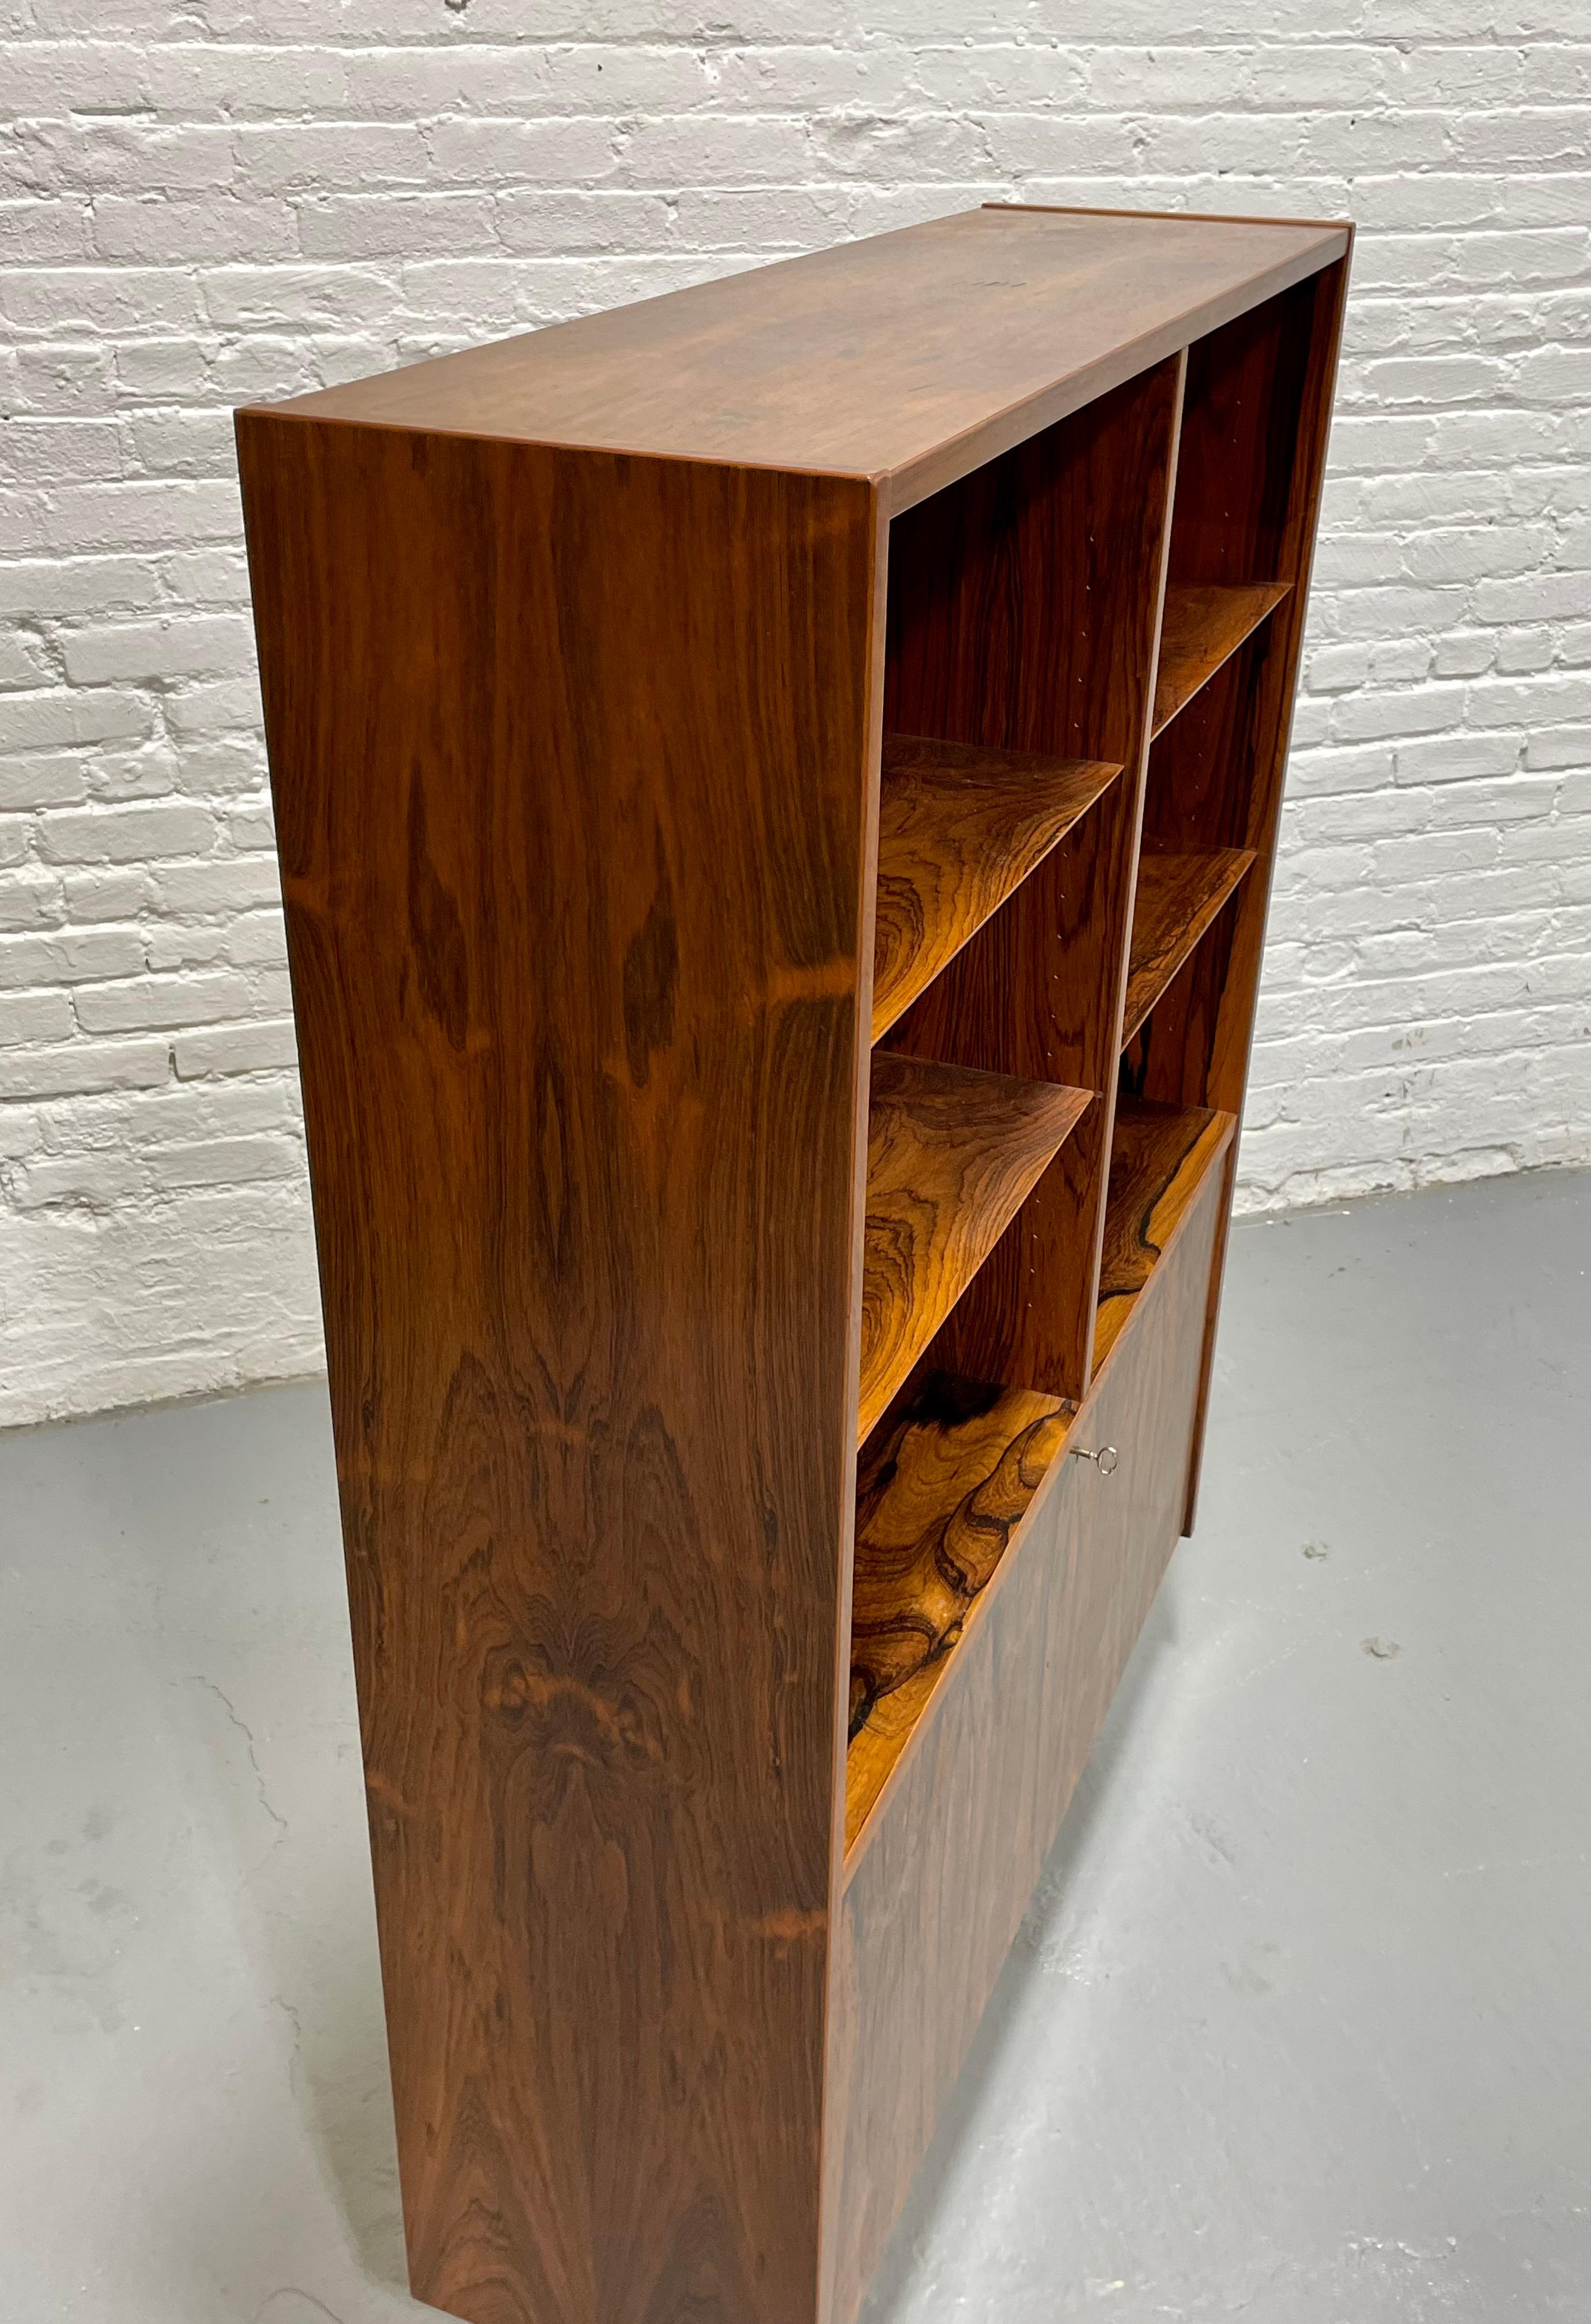 DANISH Mid Century Modern ROSEWOOD BOOKCASE / China Cabinet, c. 1960's For Sale 8